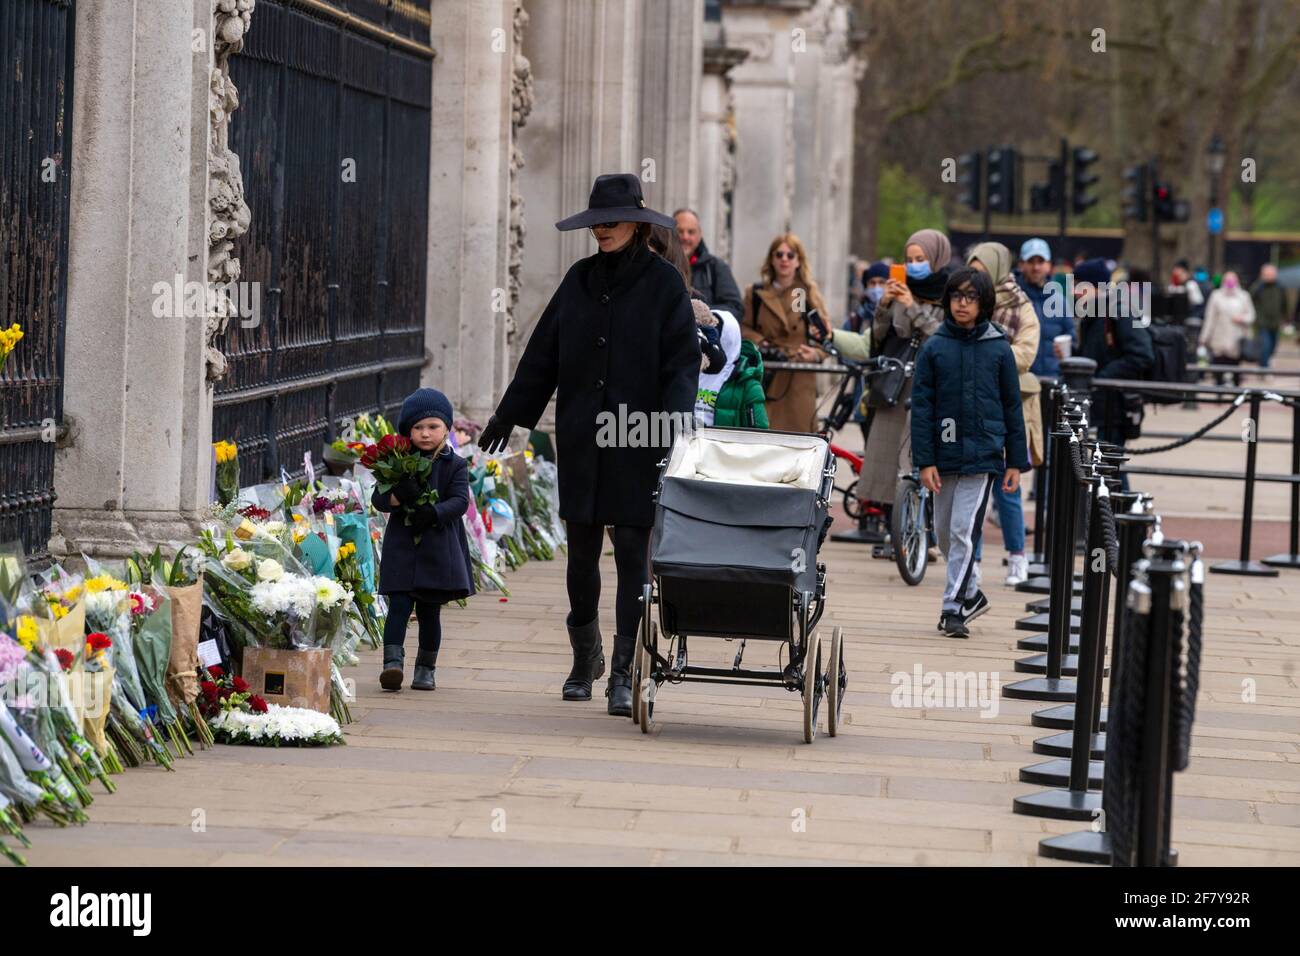 London, UK. 10th Apr, 2021. Crowds gather outside Buckingham Palace to lay floral tributes following the death of HRH The Prince Philip, Duke of Edinburgh Credit: Ian Davidson/Alamy Live News Stock Photo